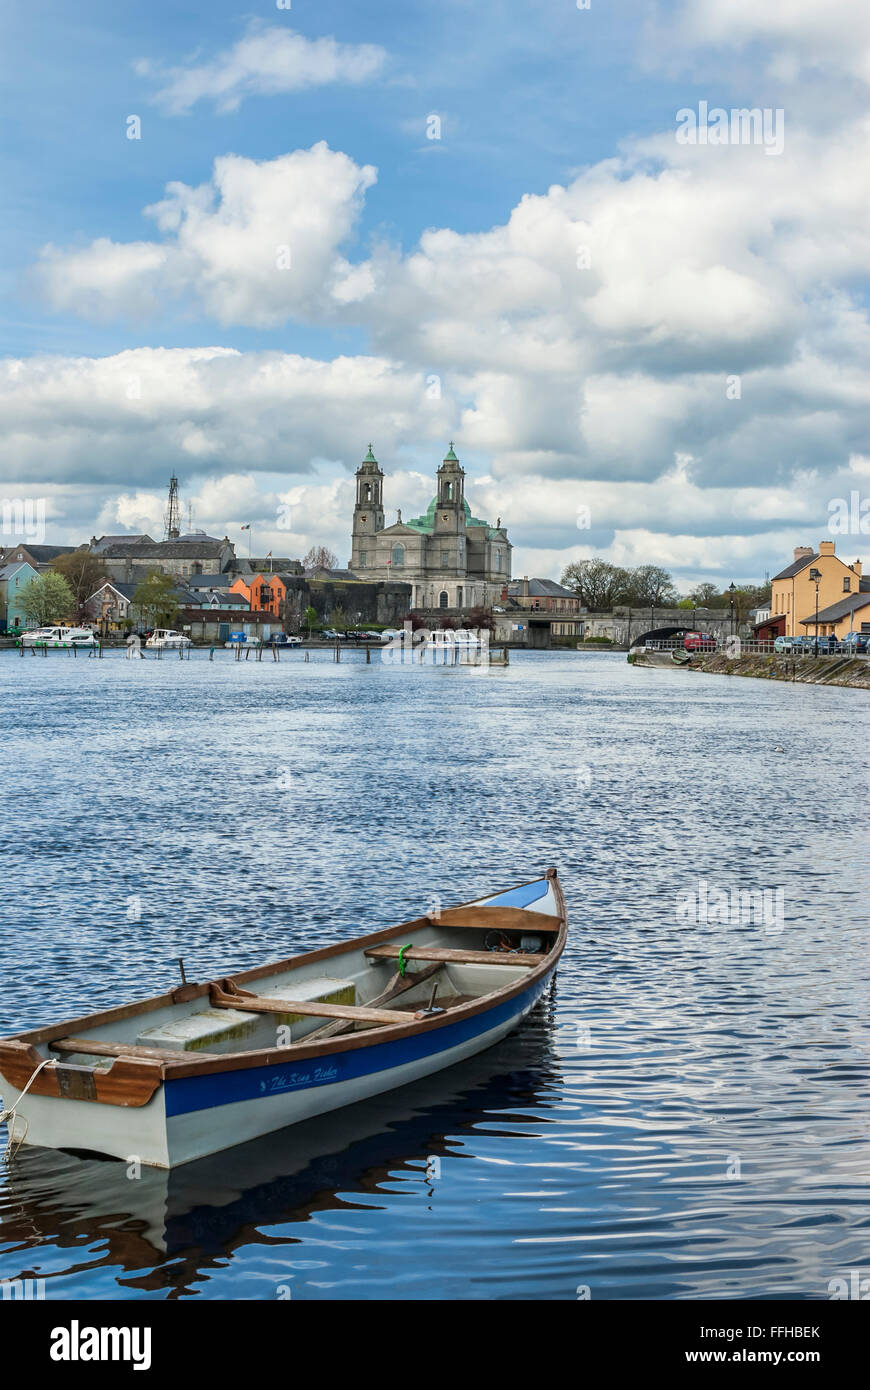 Rowing boat at the River Shannon with Athlone Cathedral in background, Ireland Stock Photo